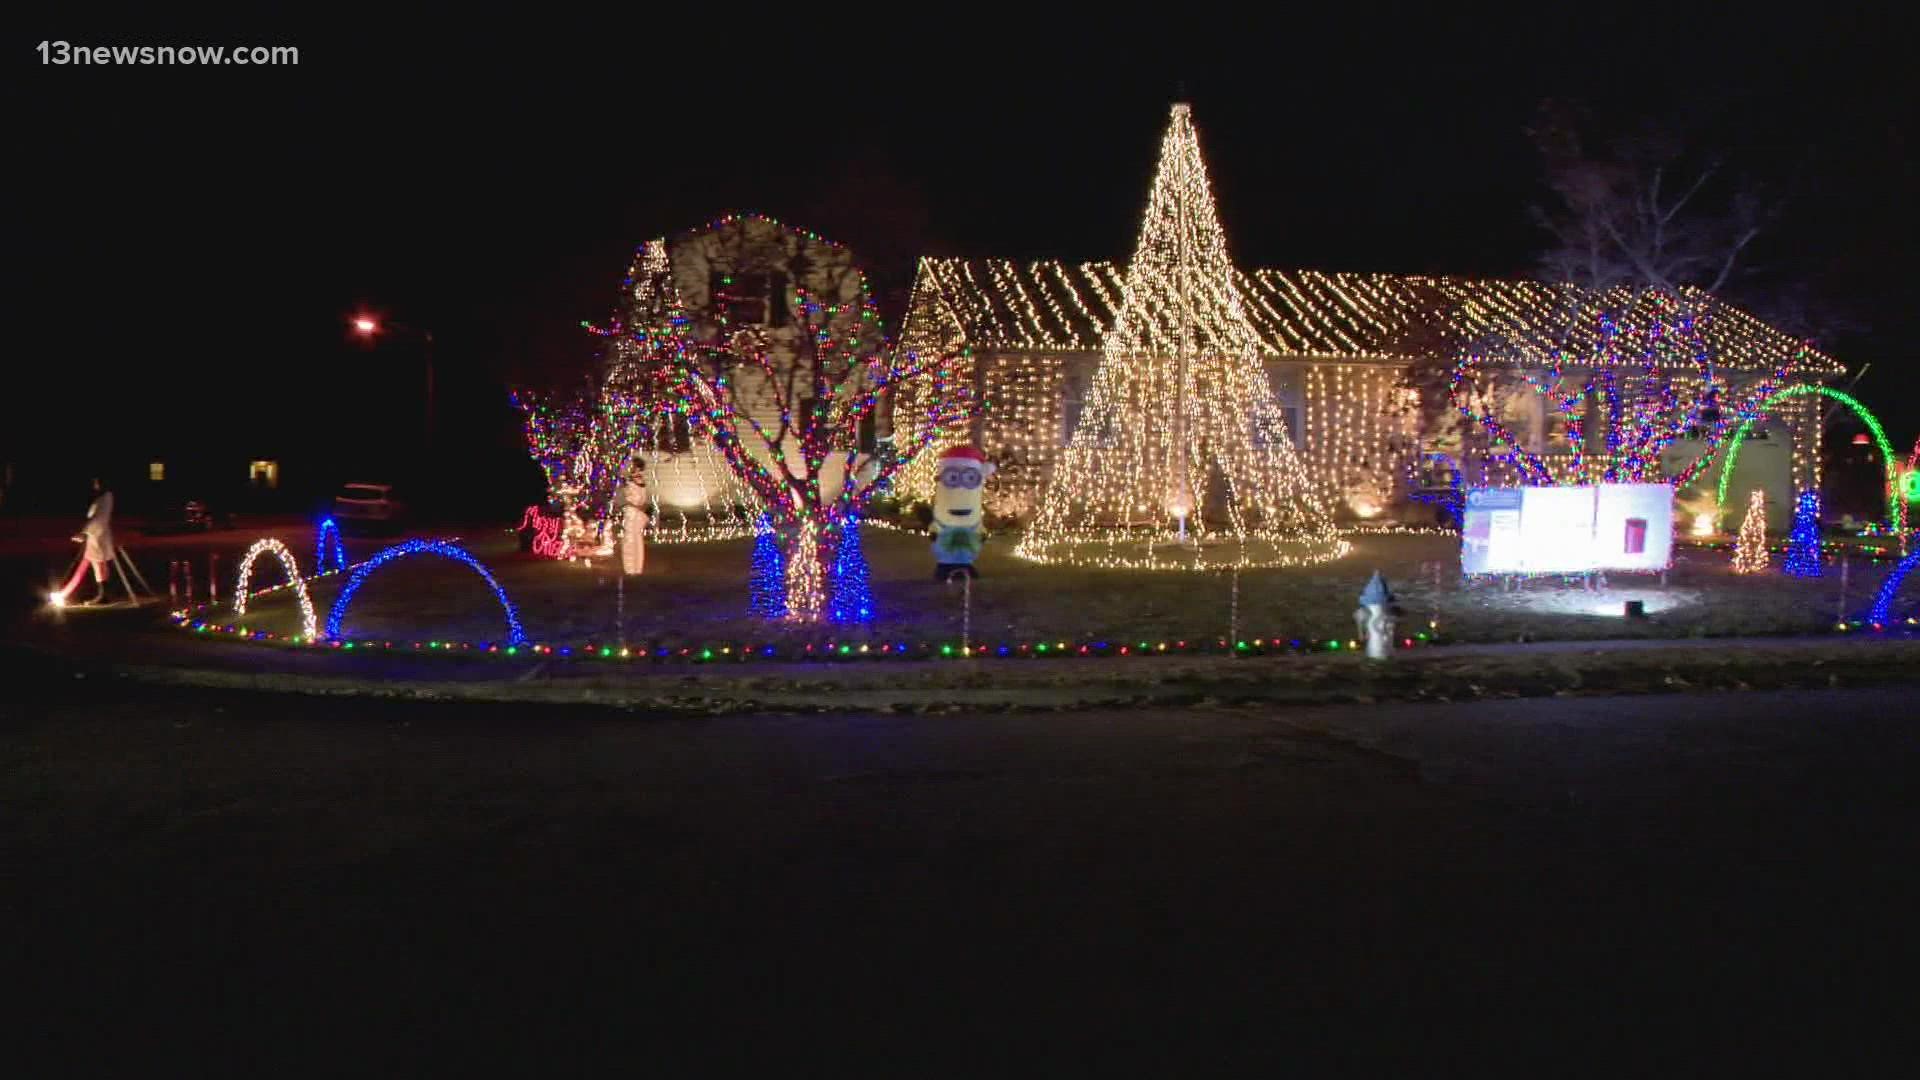 The Trapp's home on Scotfield Drive is fitted with more than 50,000 lights and lots of festive decorations. It's part of their goal to give back and give joy.